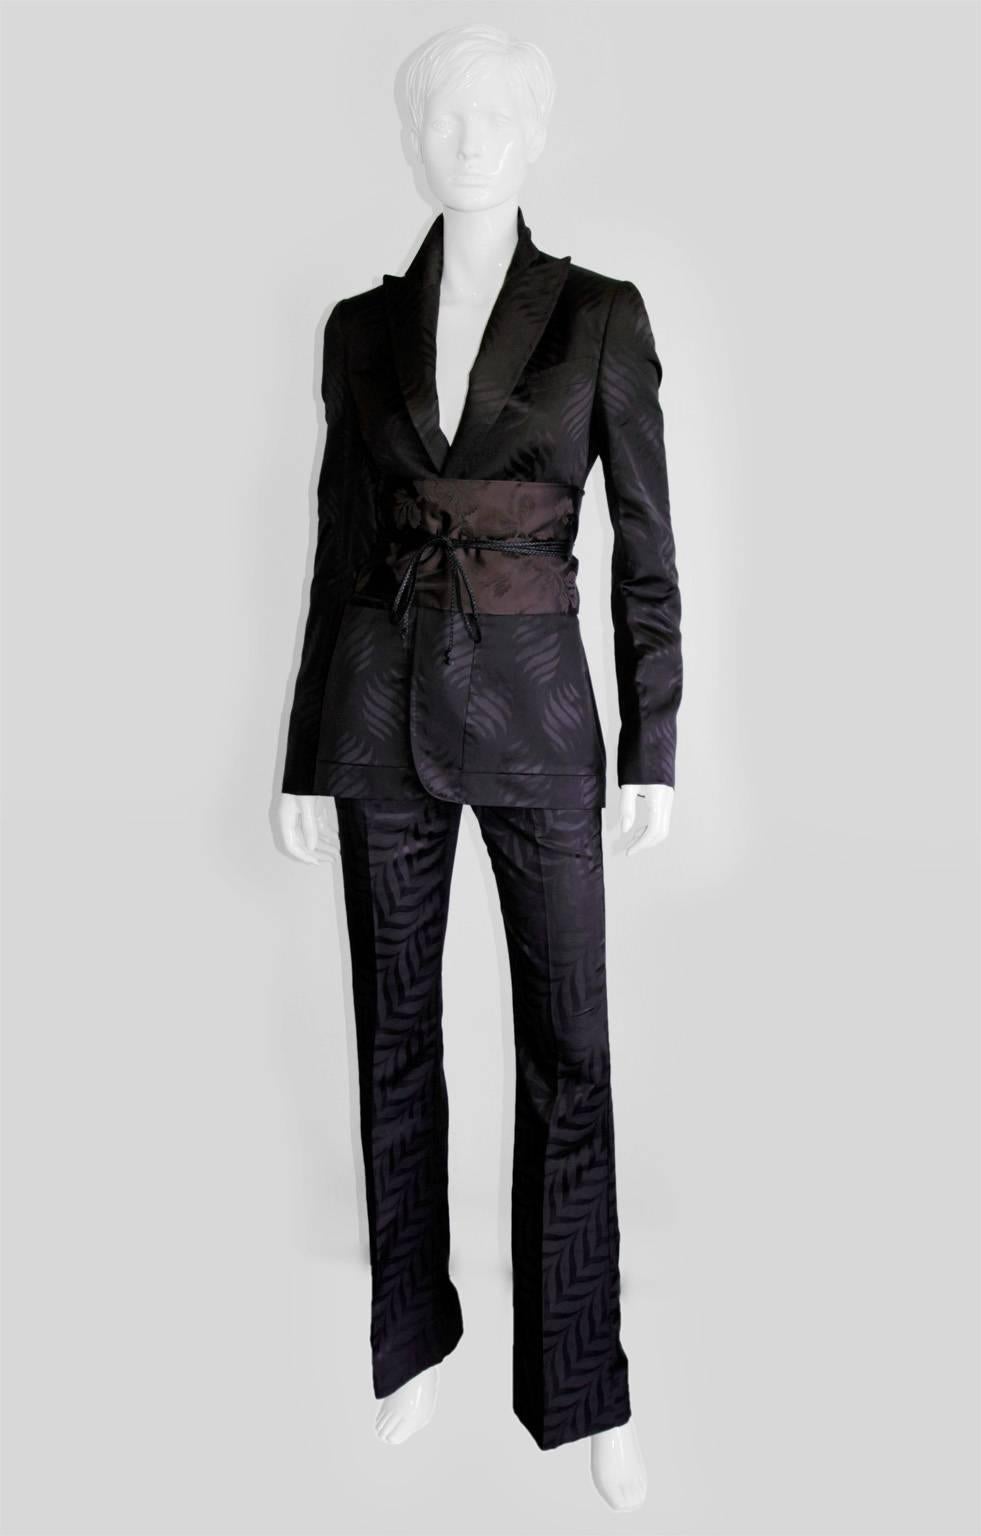 That Rare & Iconic Tom Ford For Gucci Fall Winter 2002 Gothic Collection Silk Kimono Jacket, Pants & Obi!

Who could ever forget Tom Ford's fall/winter 2002 Gothic Collection for Gucci... with that dark chinoiseriesque styling & heavenly